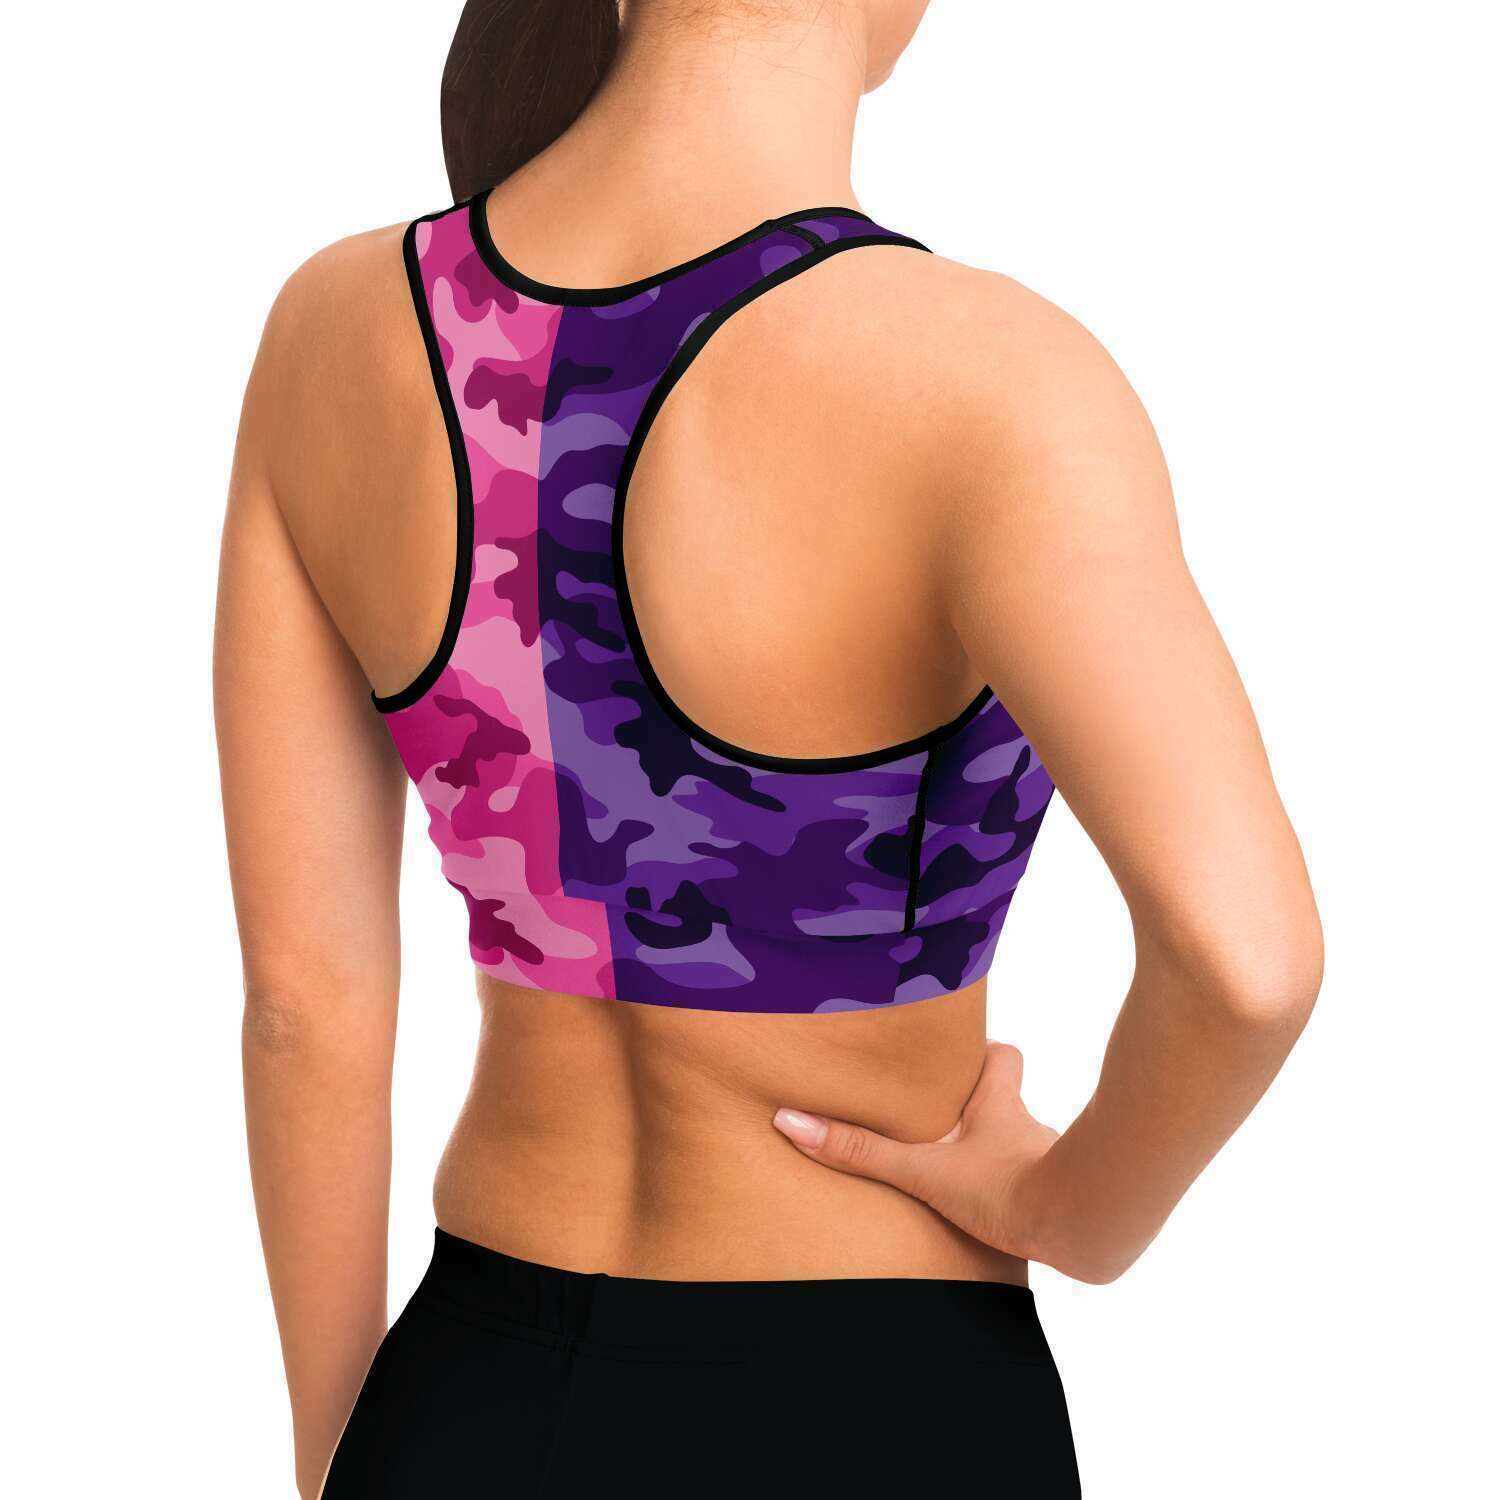 Women's All Purple Pink Camouflage Athletic Sports Bra Model Right